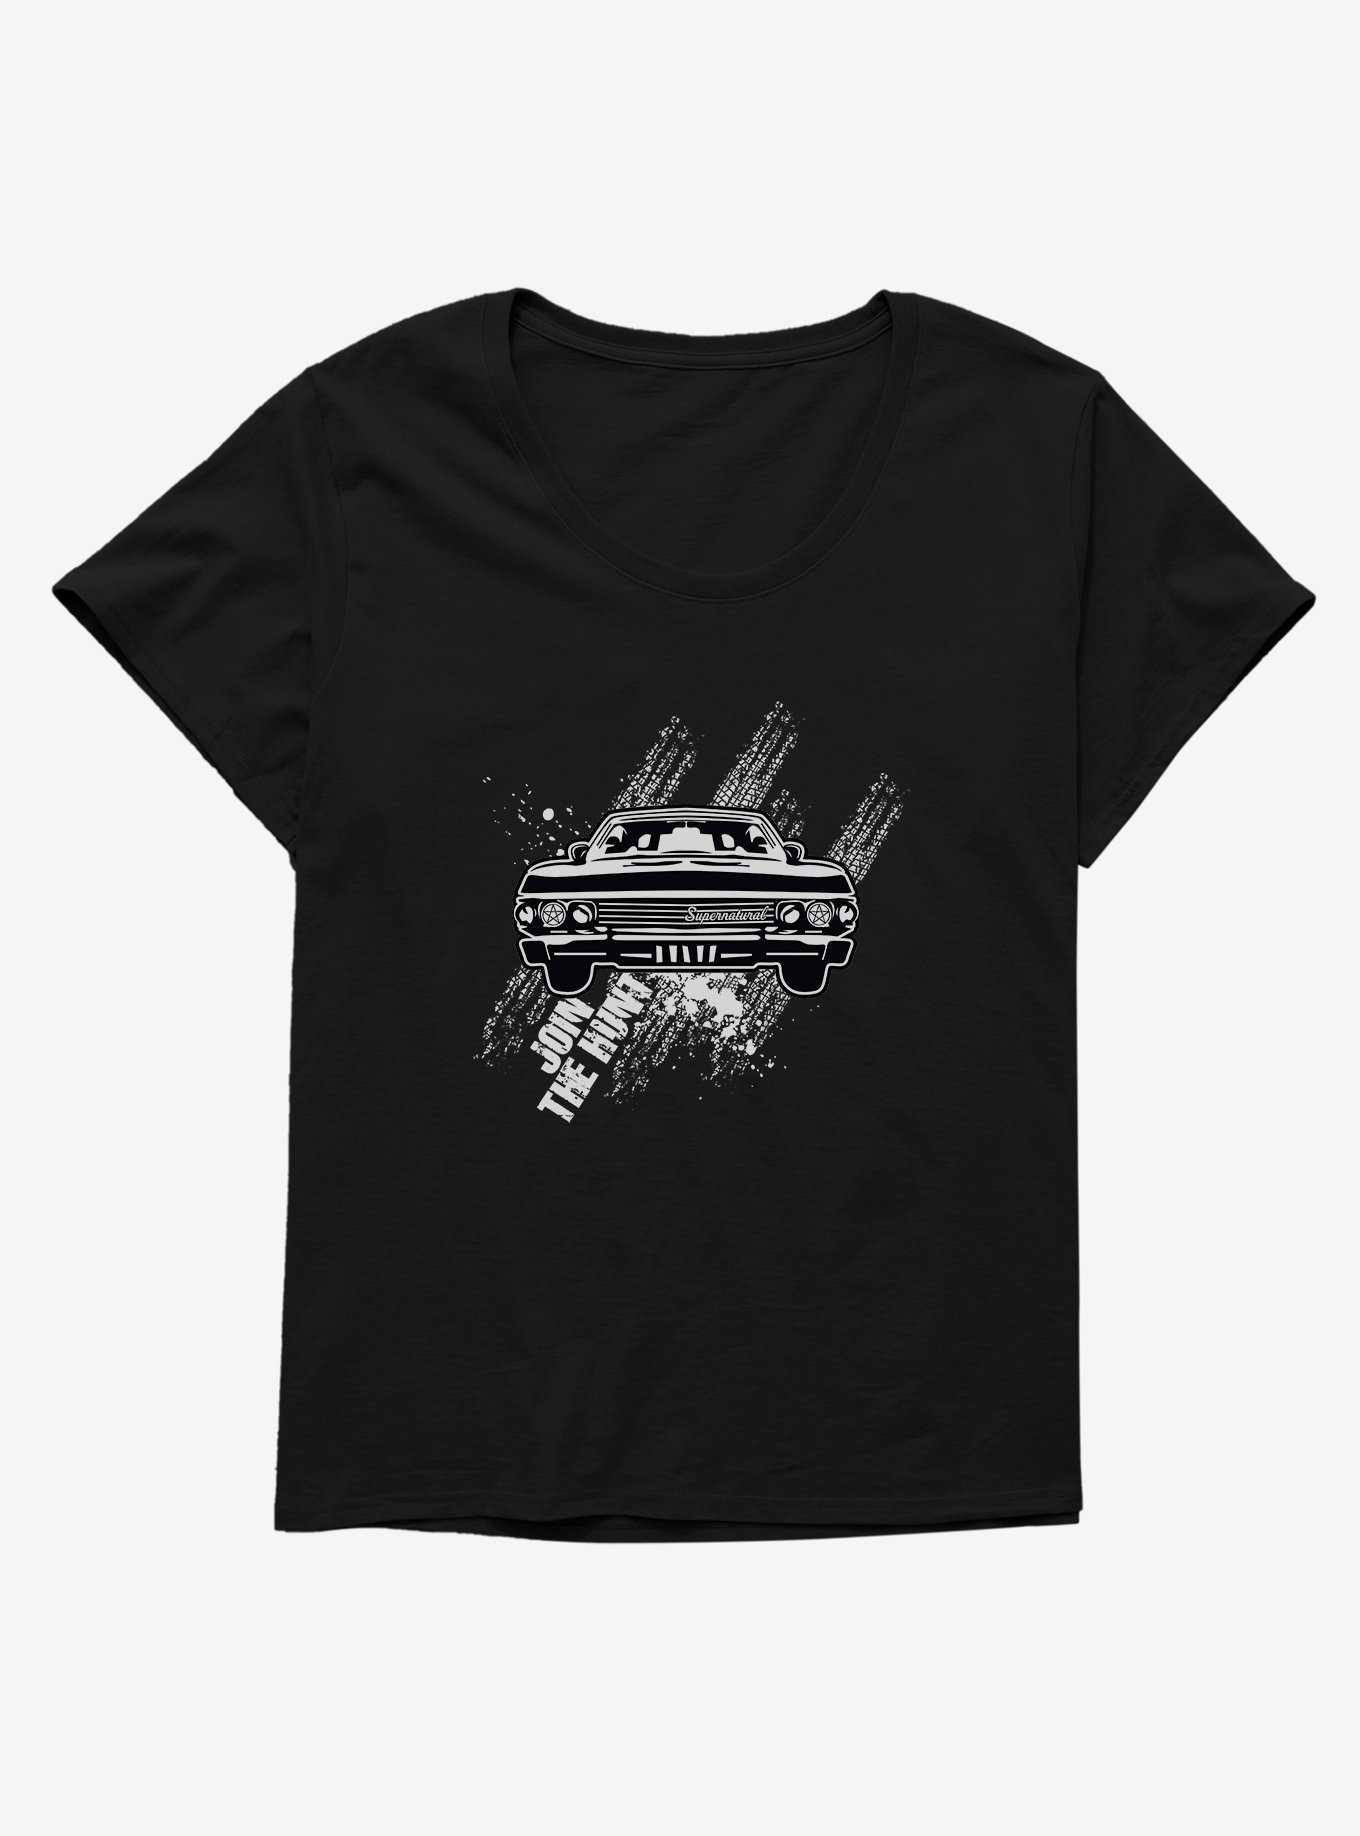 Supernatural Impala Baby Join The Hunt Girls T-Shirt Plus Size, , hi-res